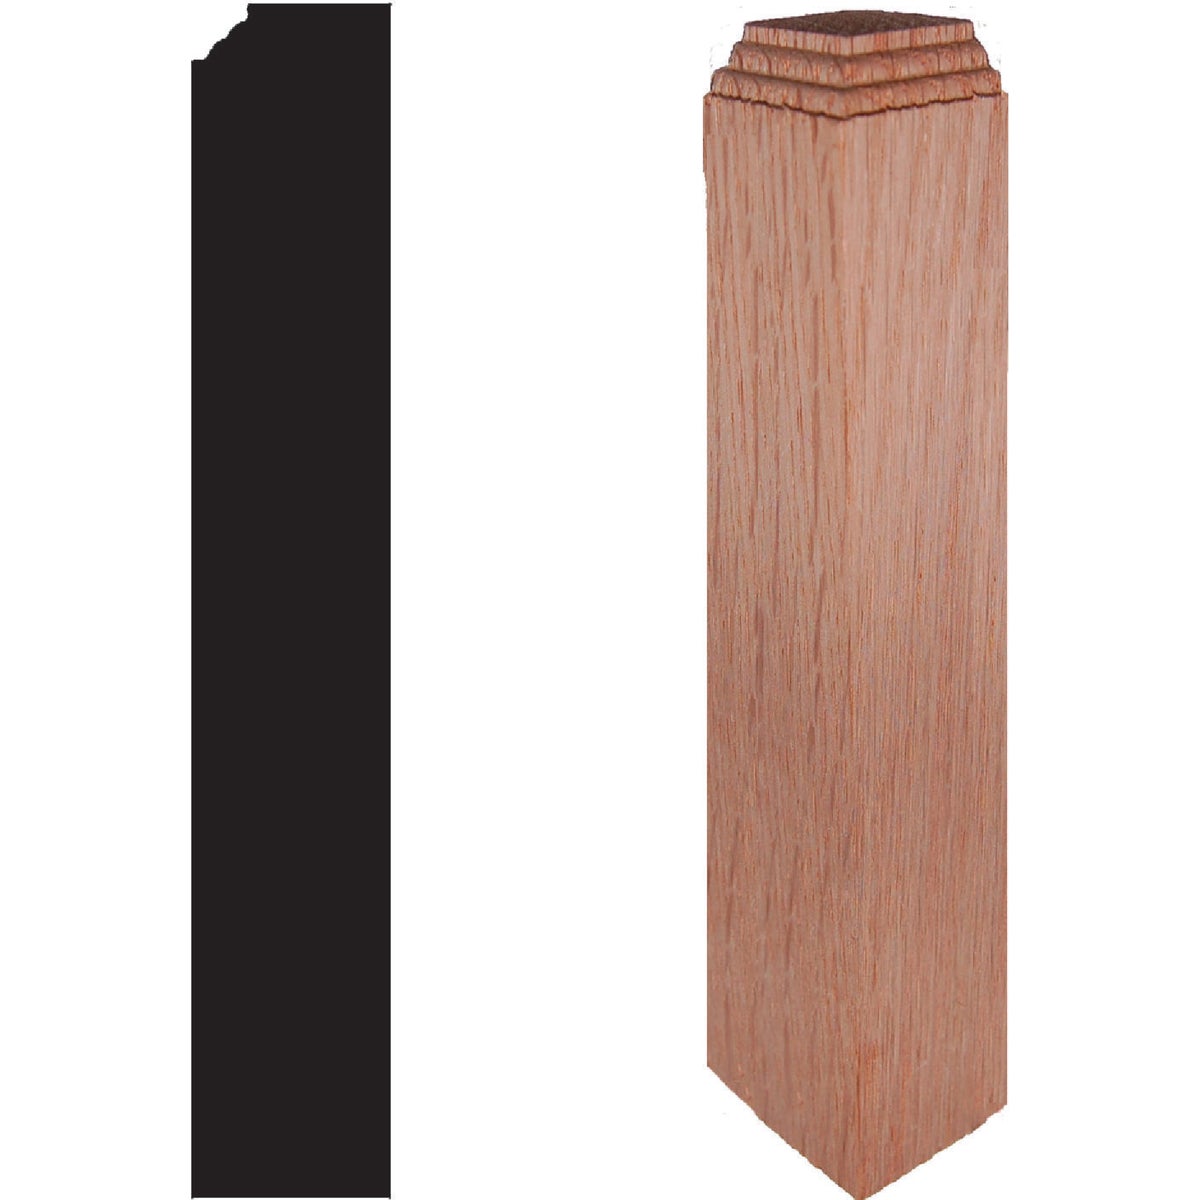 Item 190144, Designed for use with all standard wood moldings presently stocked by all 